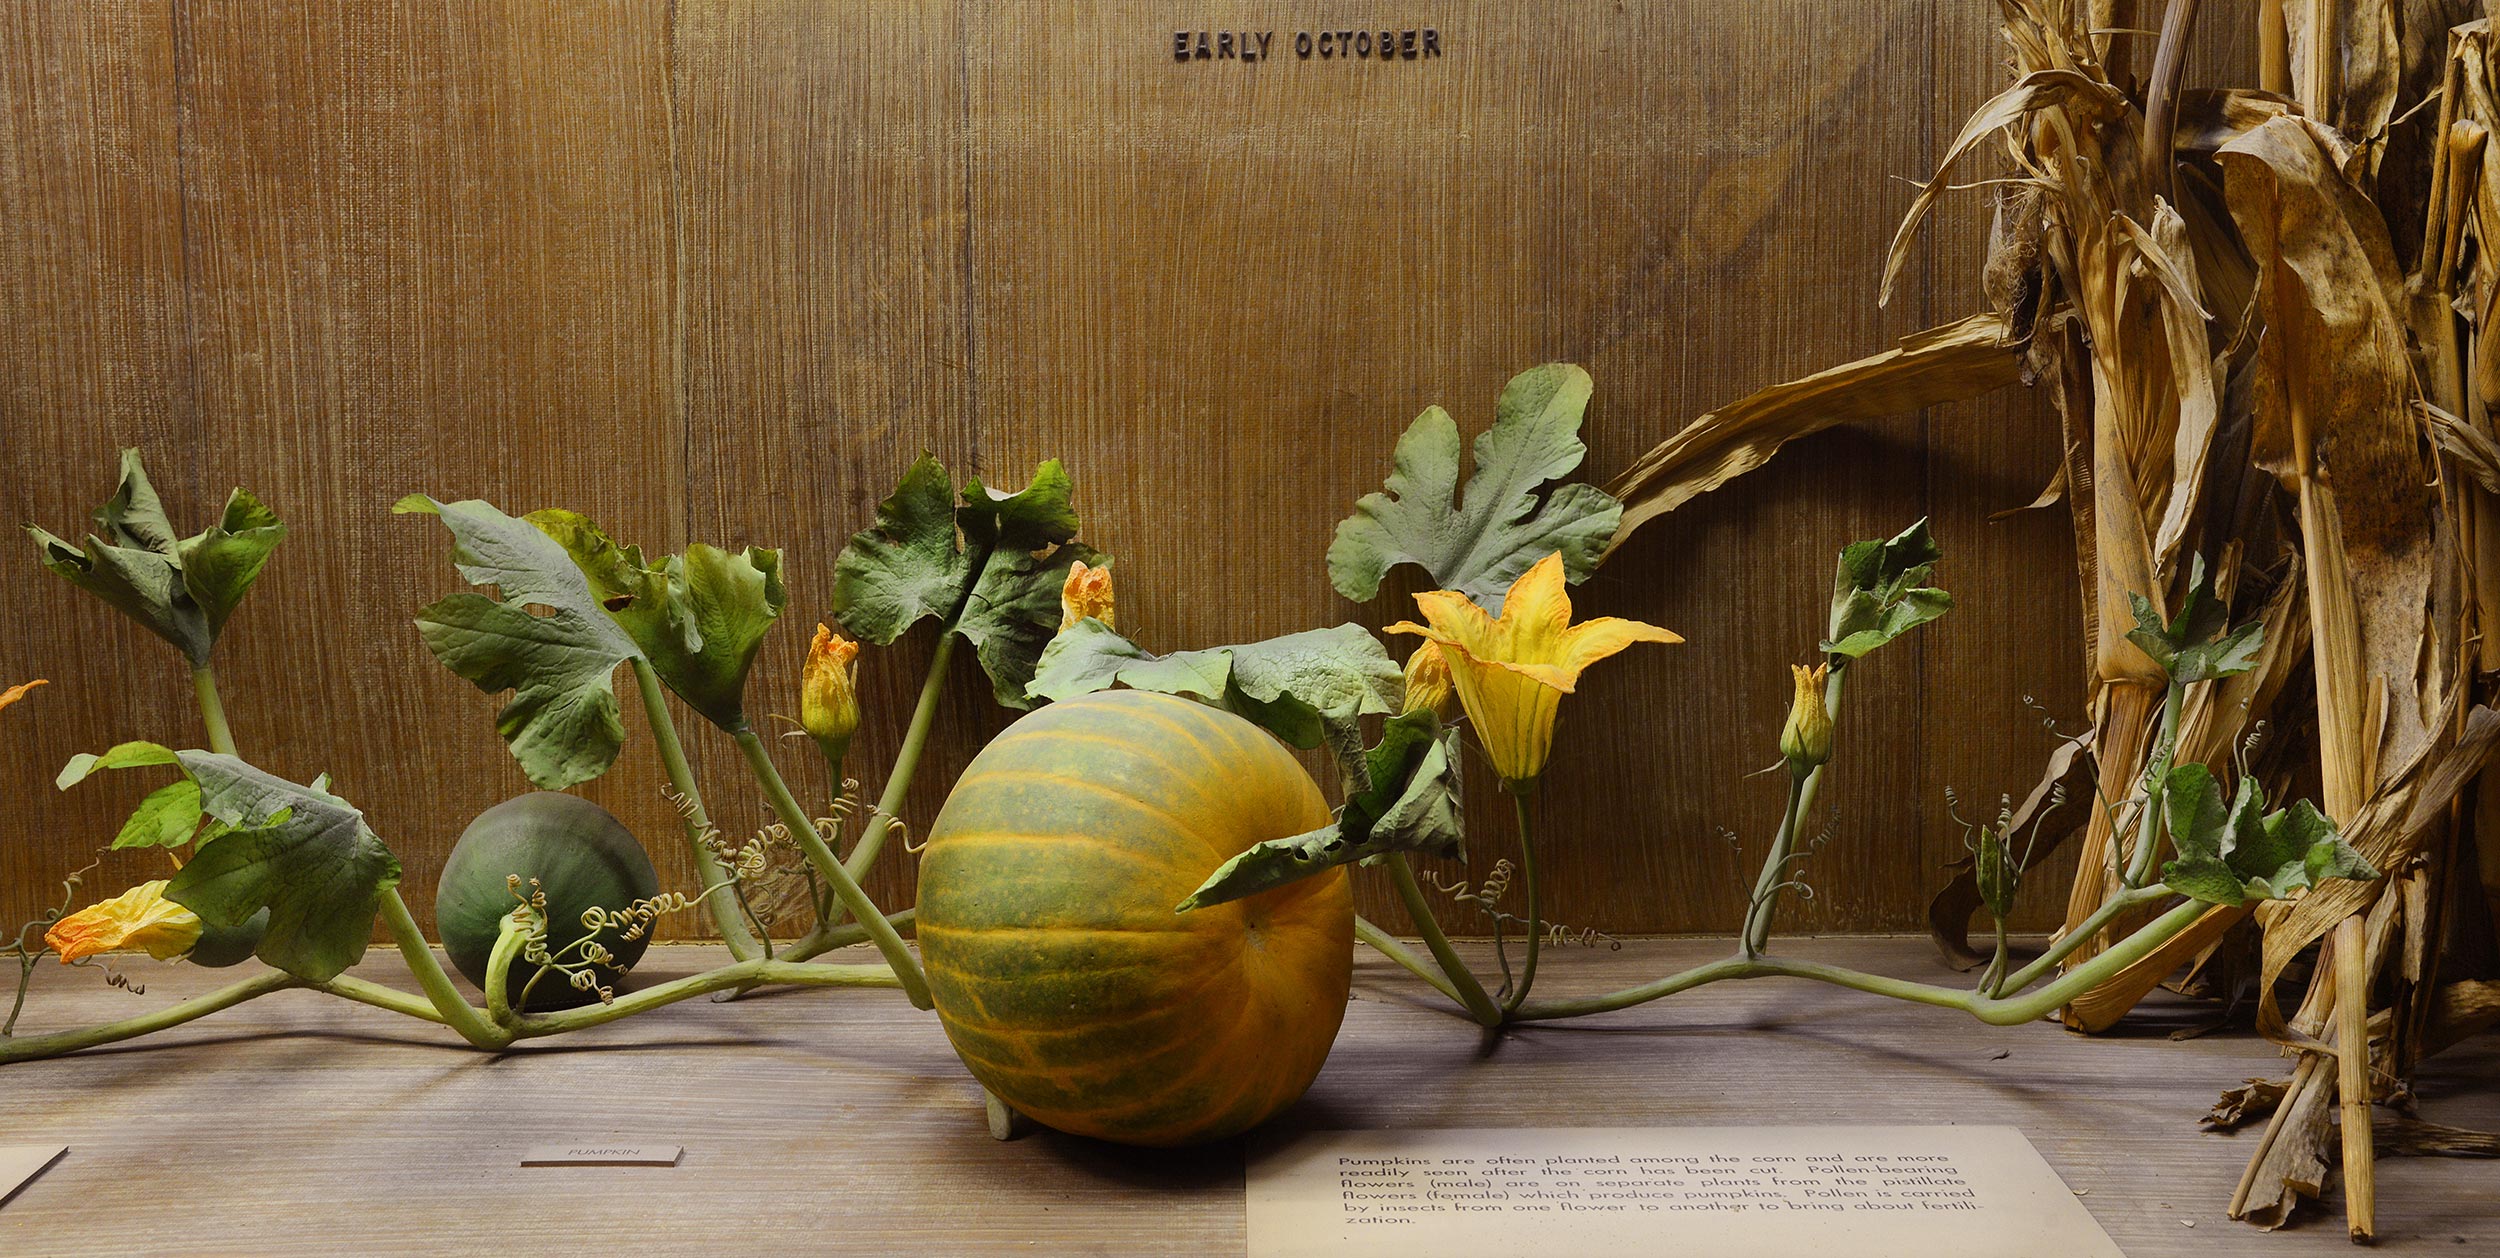 Section of a museum case showing corn and a pumpkin plant.